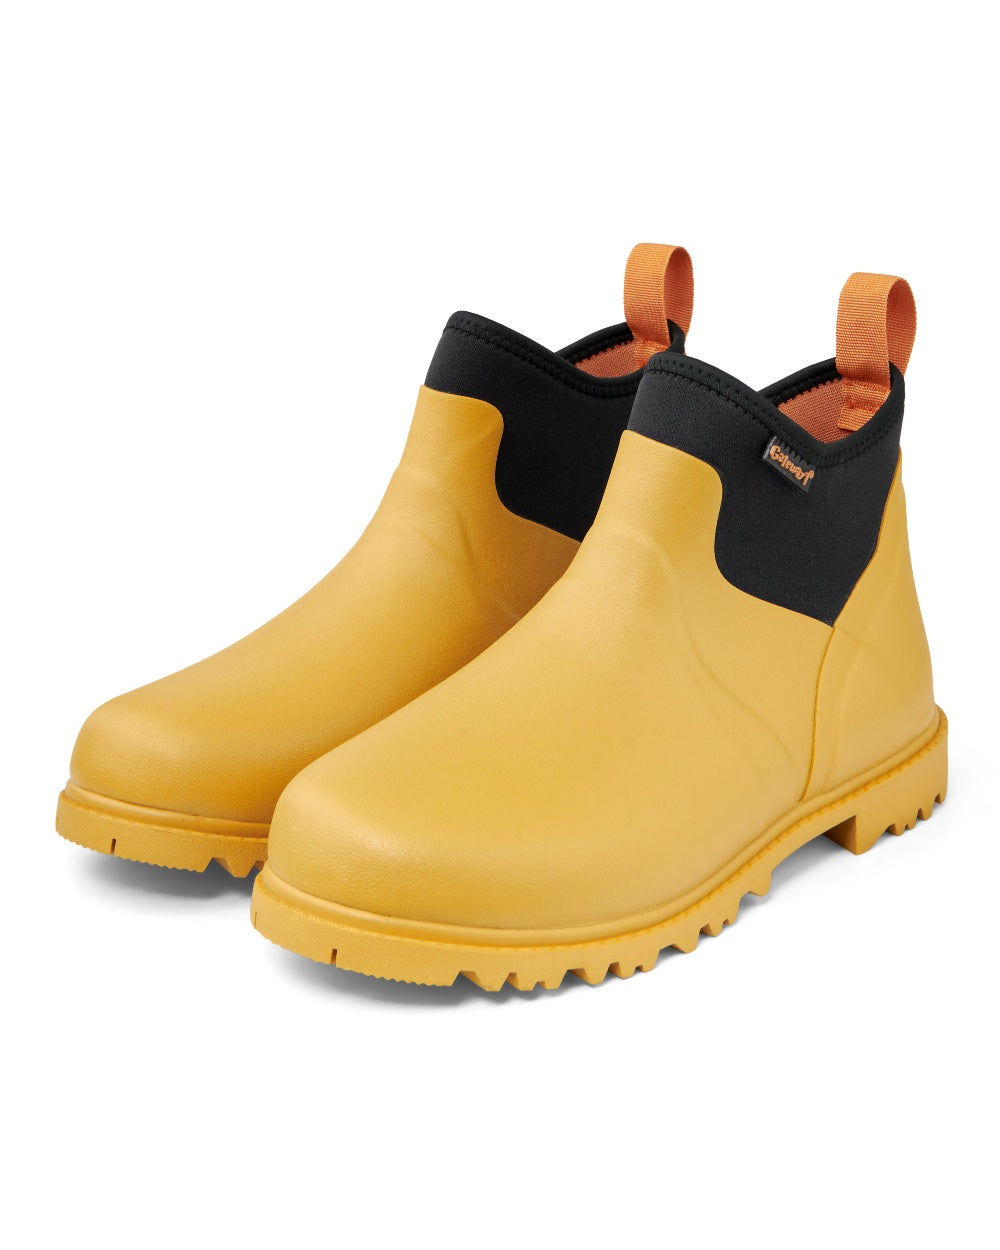 Amber coloured Gateway1 Ascot Lady 6inch 3mm Boots on white background 